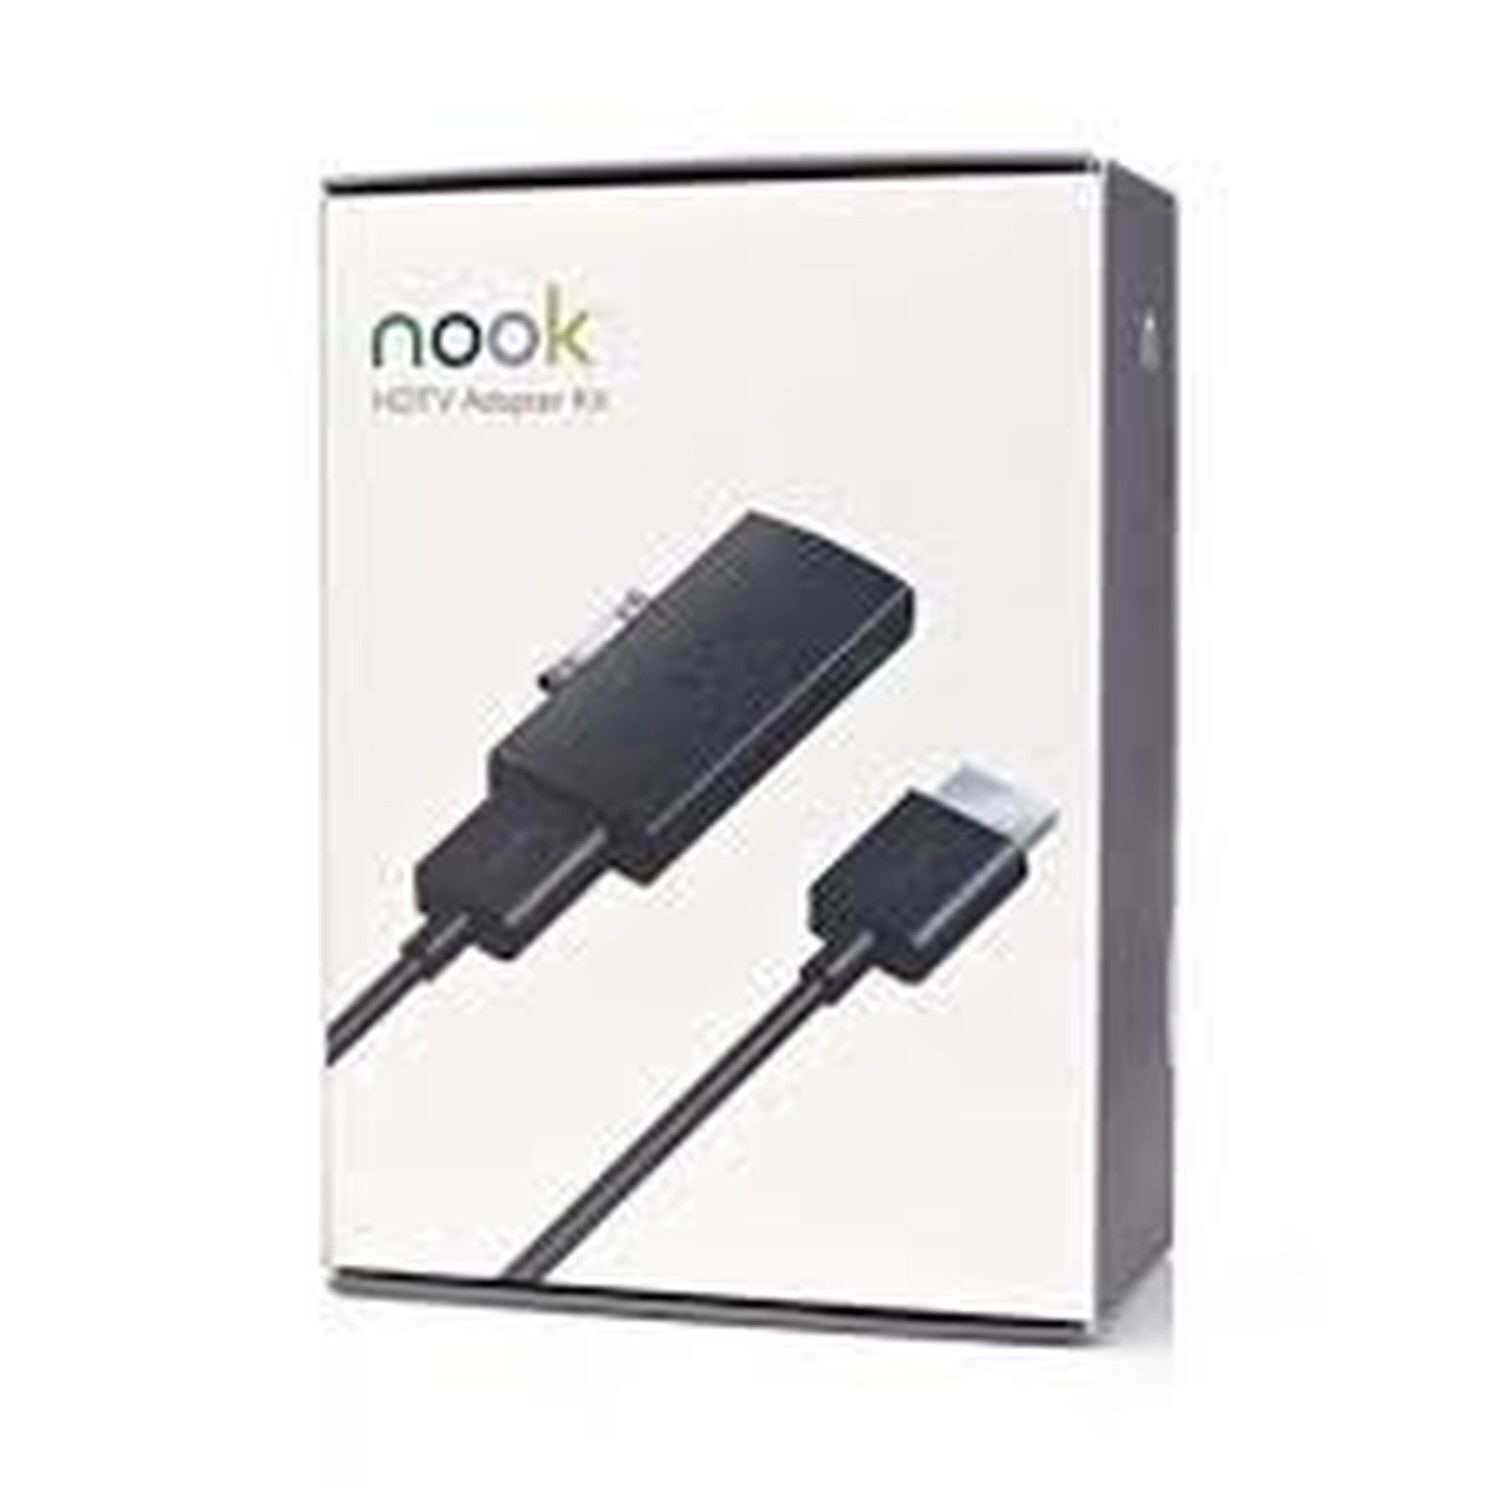 Genuine Barnes & Noble Nook HD HDTV Adapter kit for Nook HD and Nook HD+